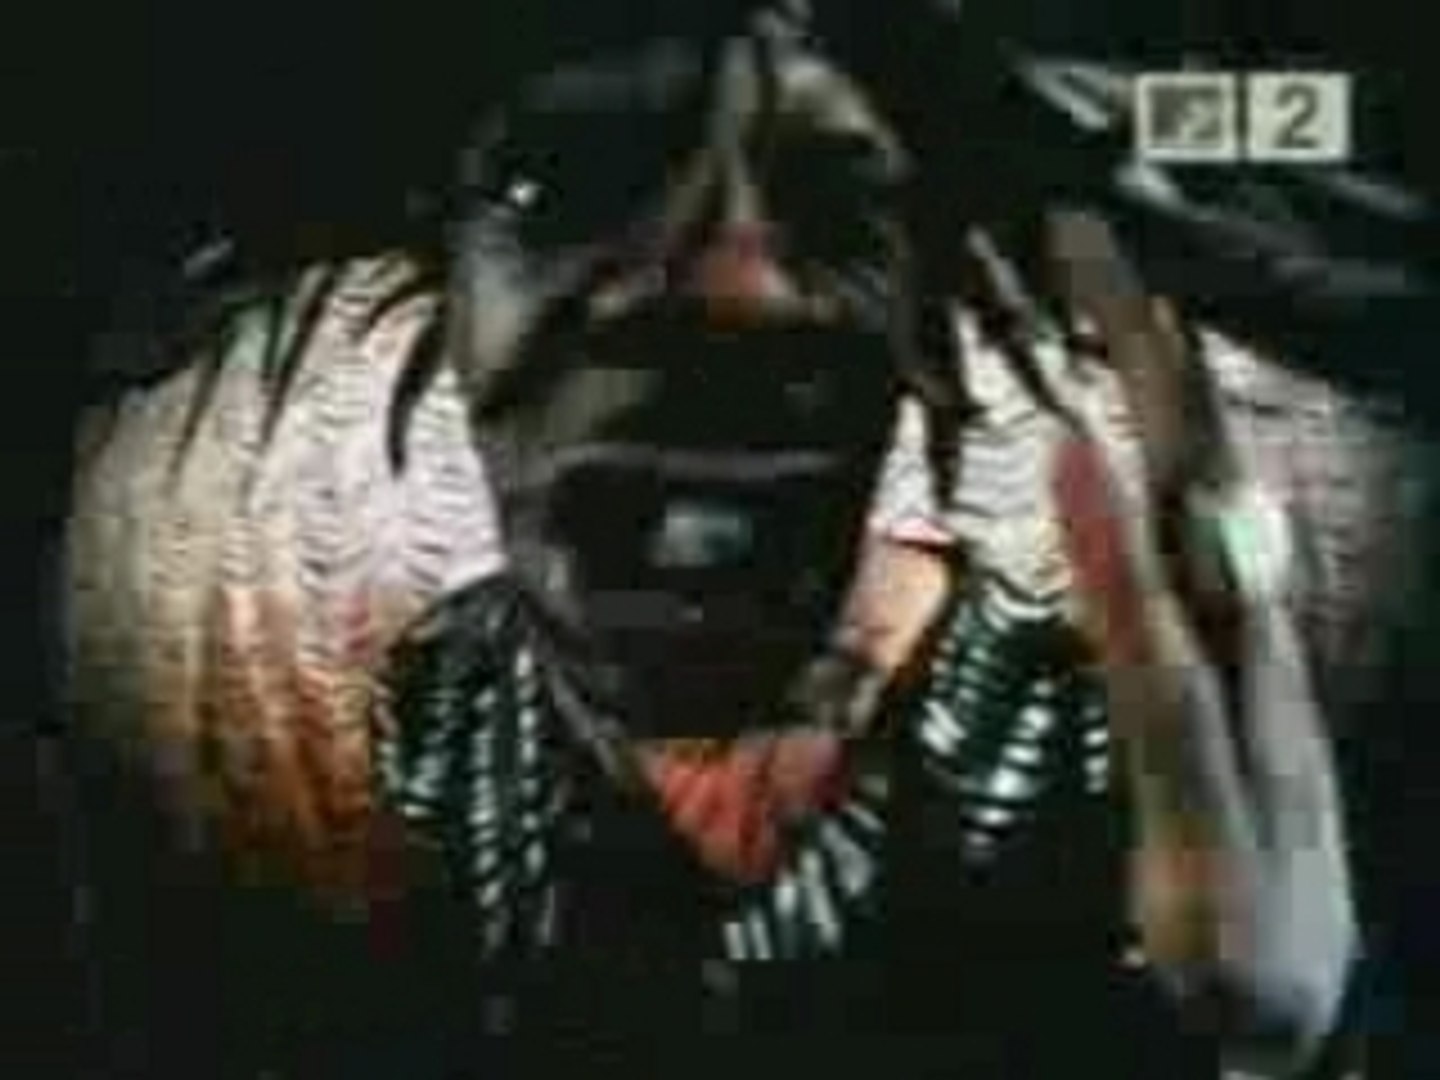 Busta rhymes - put your hands where my eyes could see - Vidéo Dailymotion